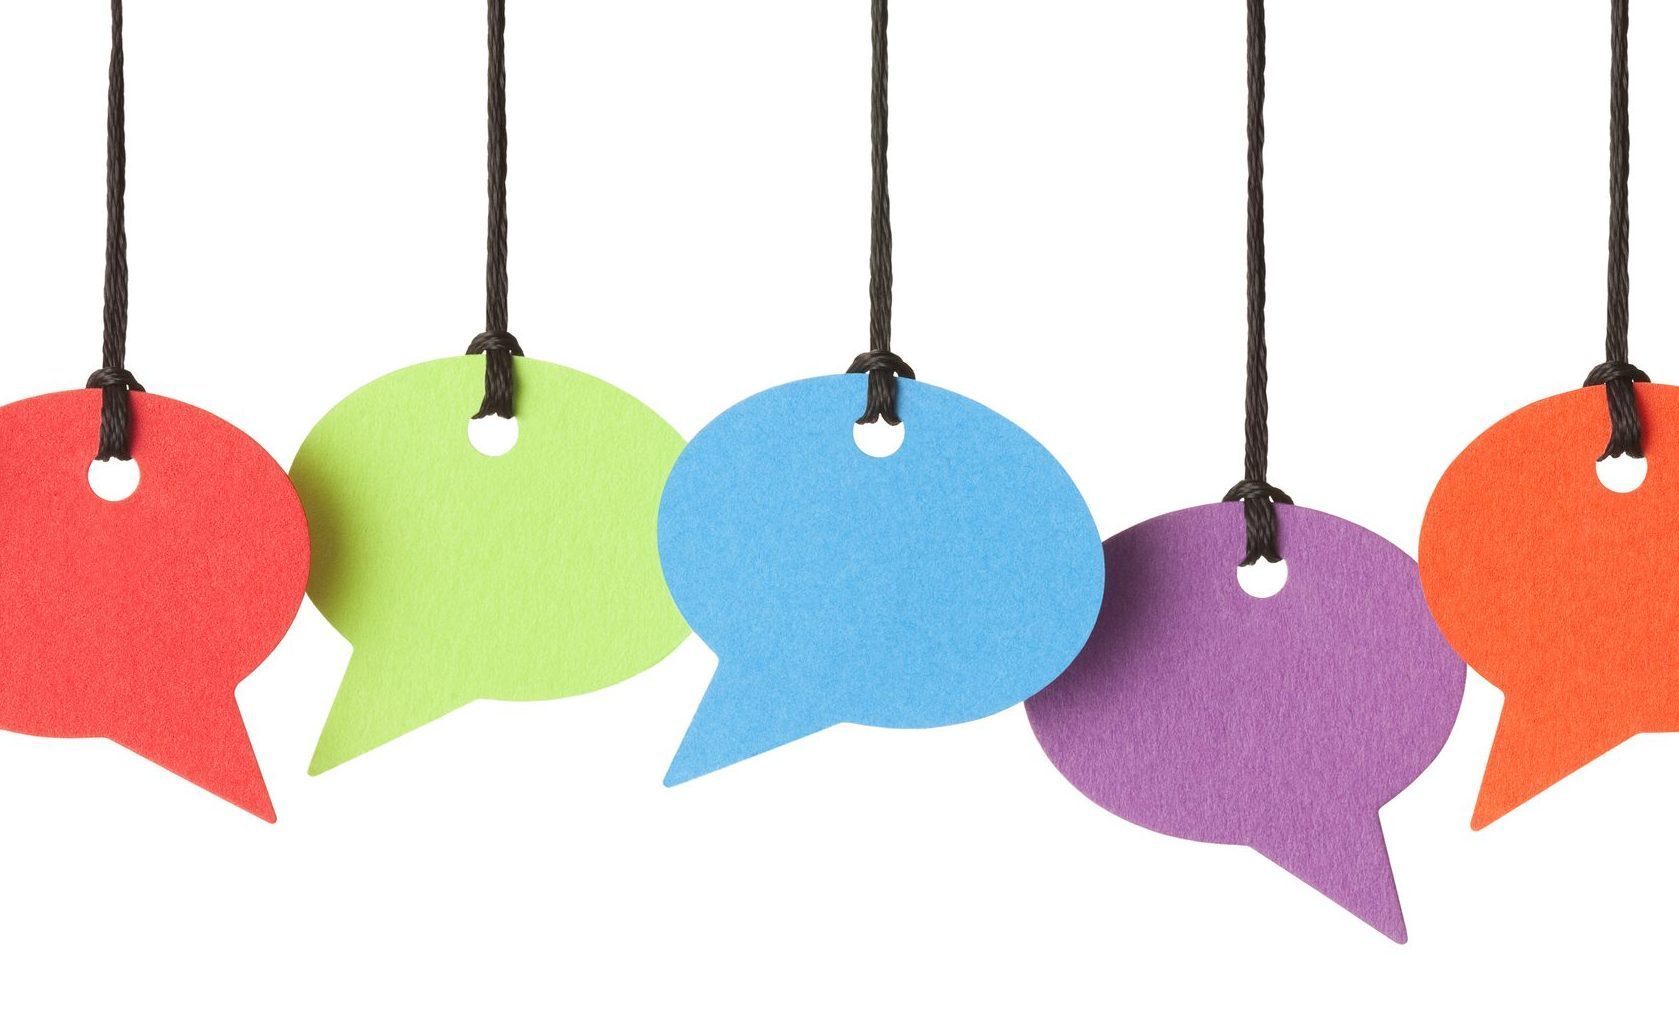 Six blank speech bubbles hanging from thread,